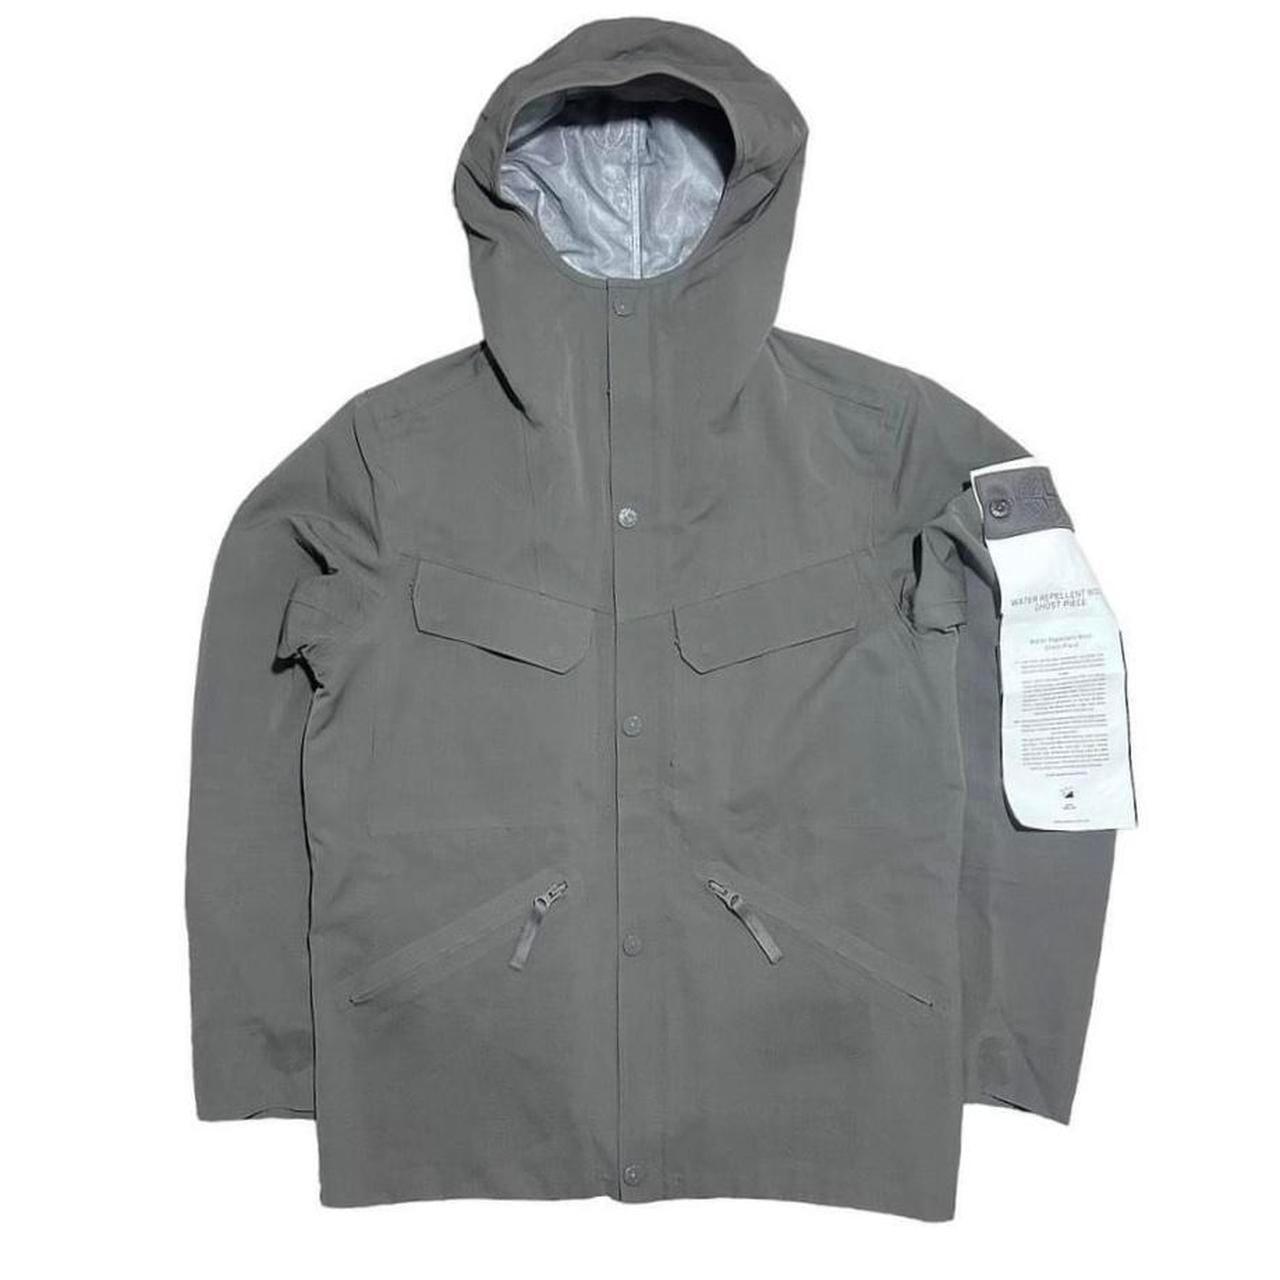 Stone Island Ghost Water Repellent Jacket - Known Source